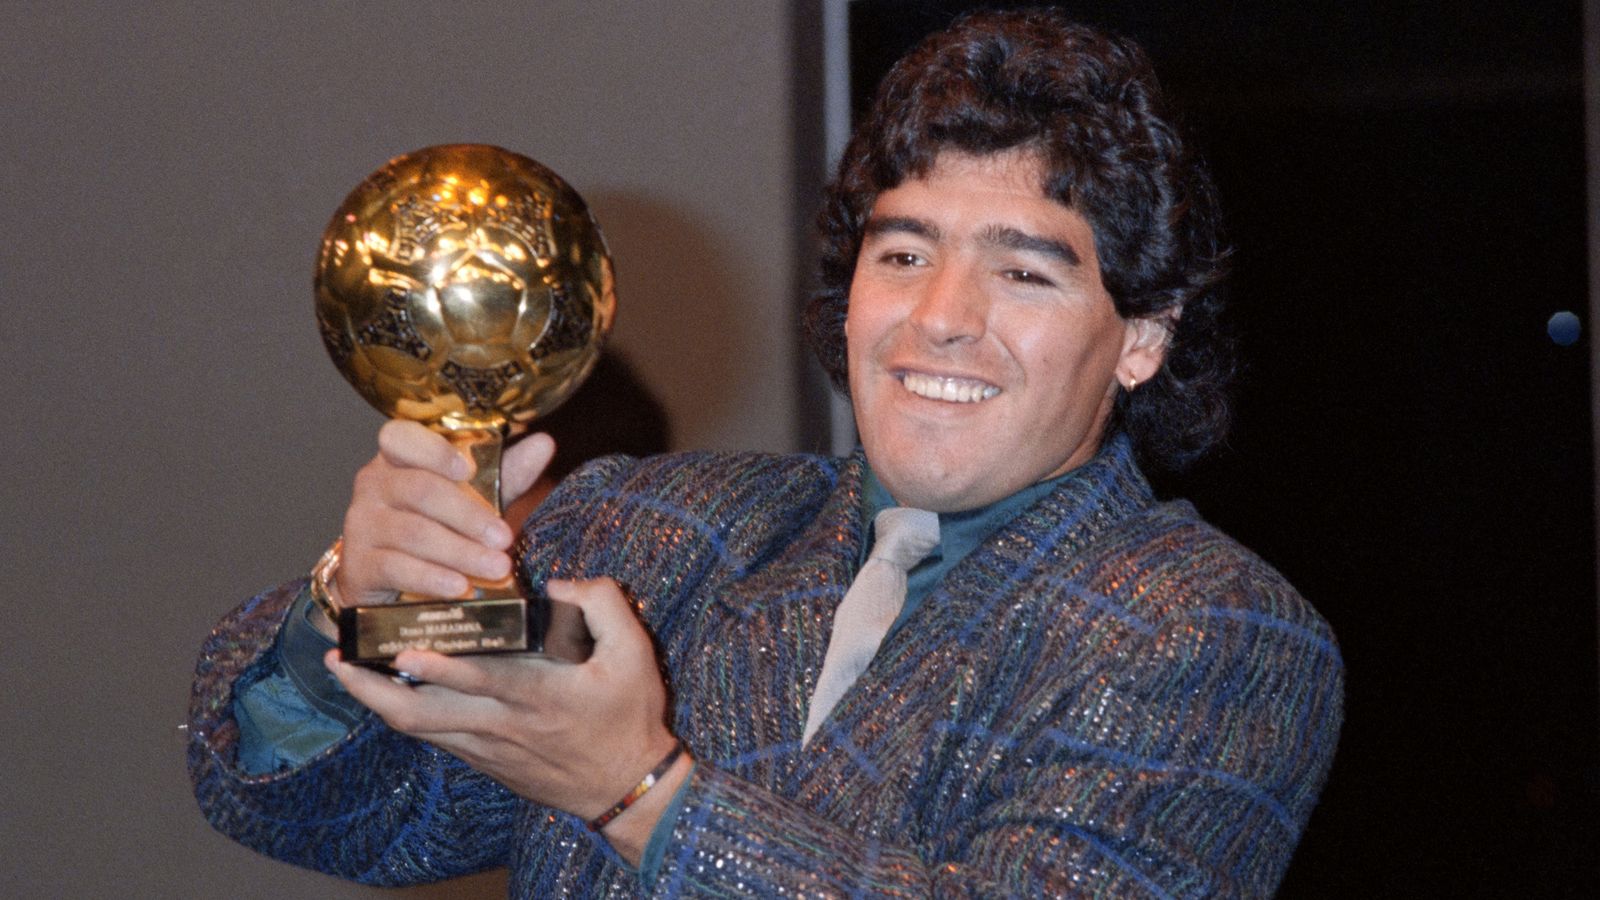 Maradona's Golden Ball trophy that mysteriously disappeared resurfaces - and is set to be sold